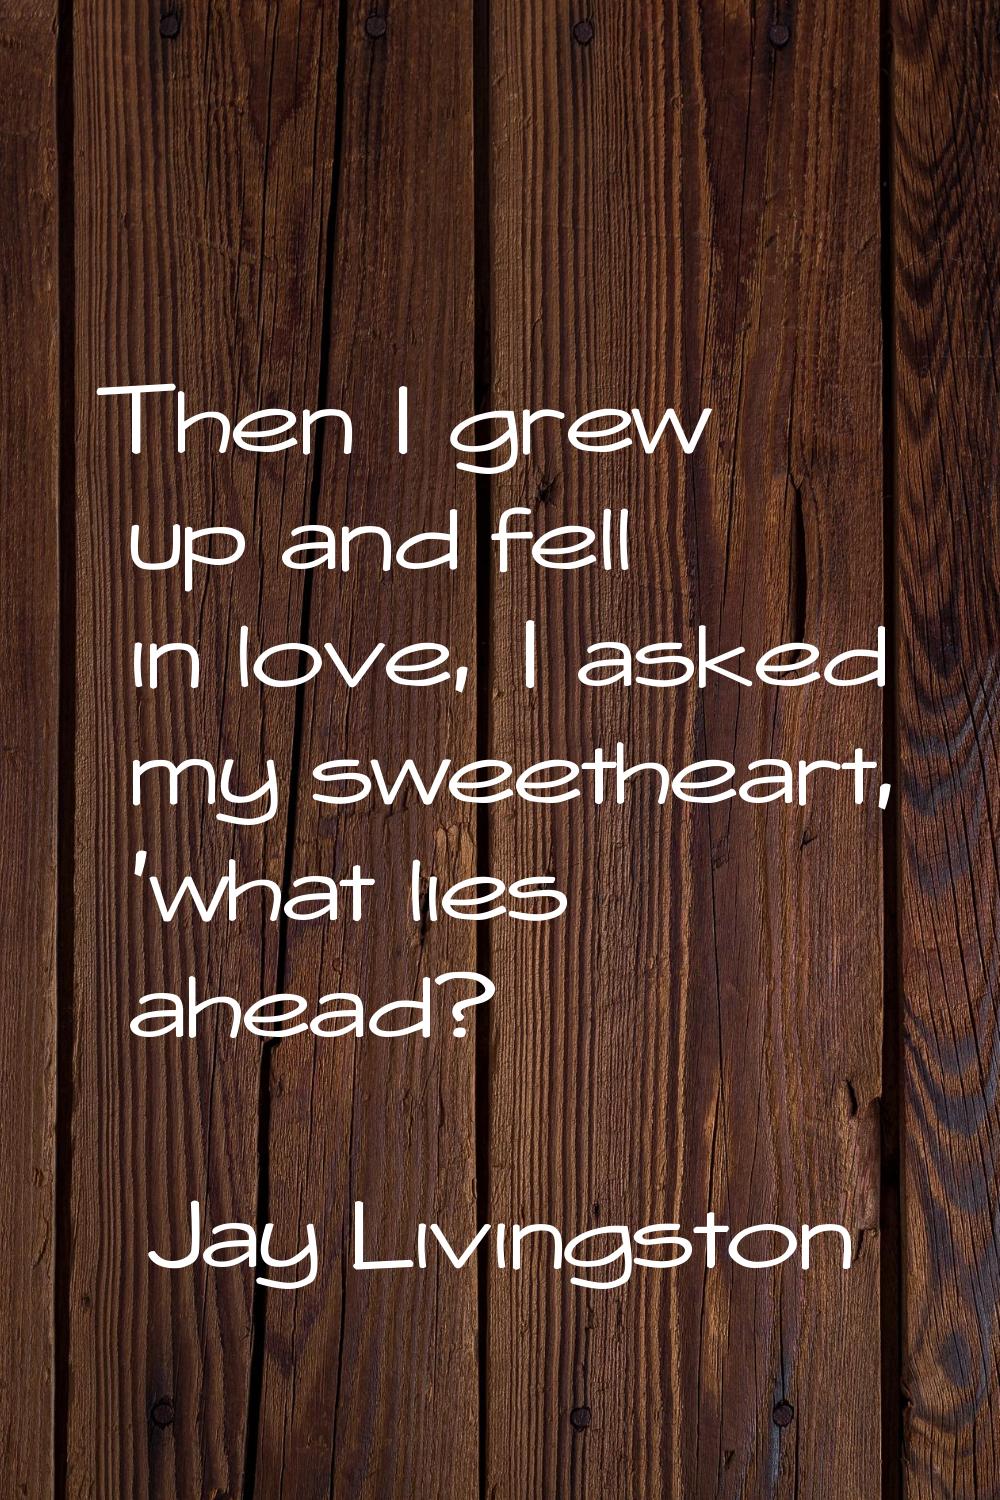 Then I grew up and fell in love, I asked my sweetheart, 'what lies ahead?